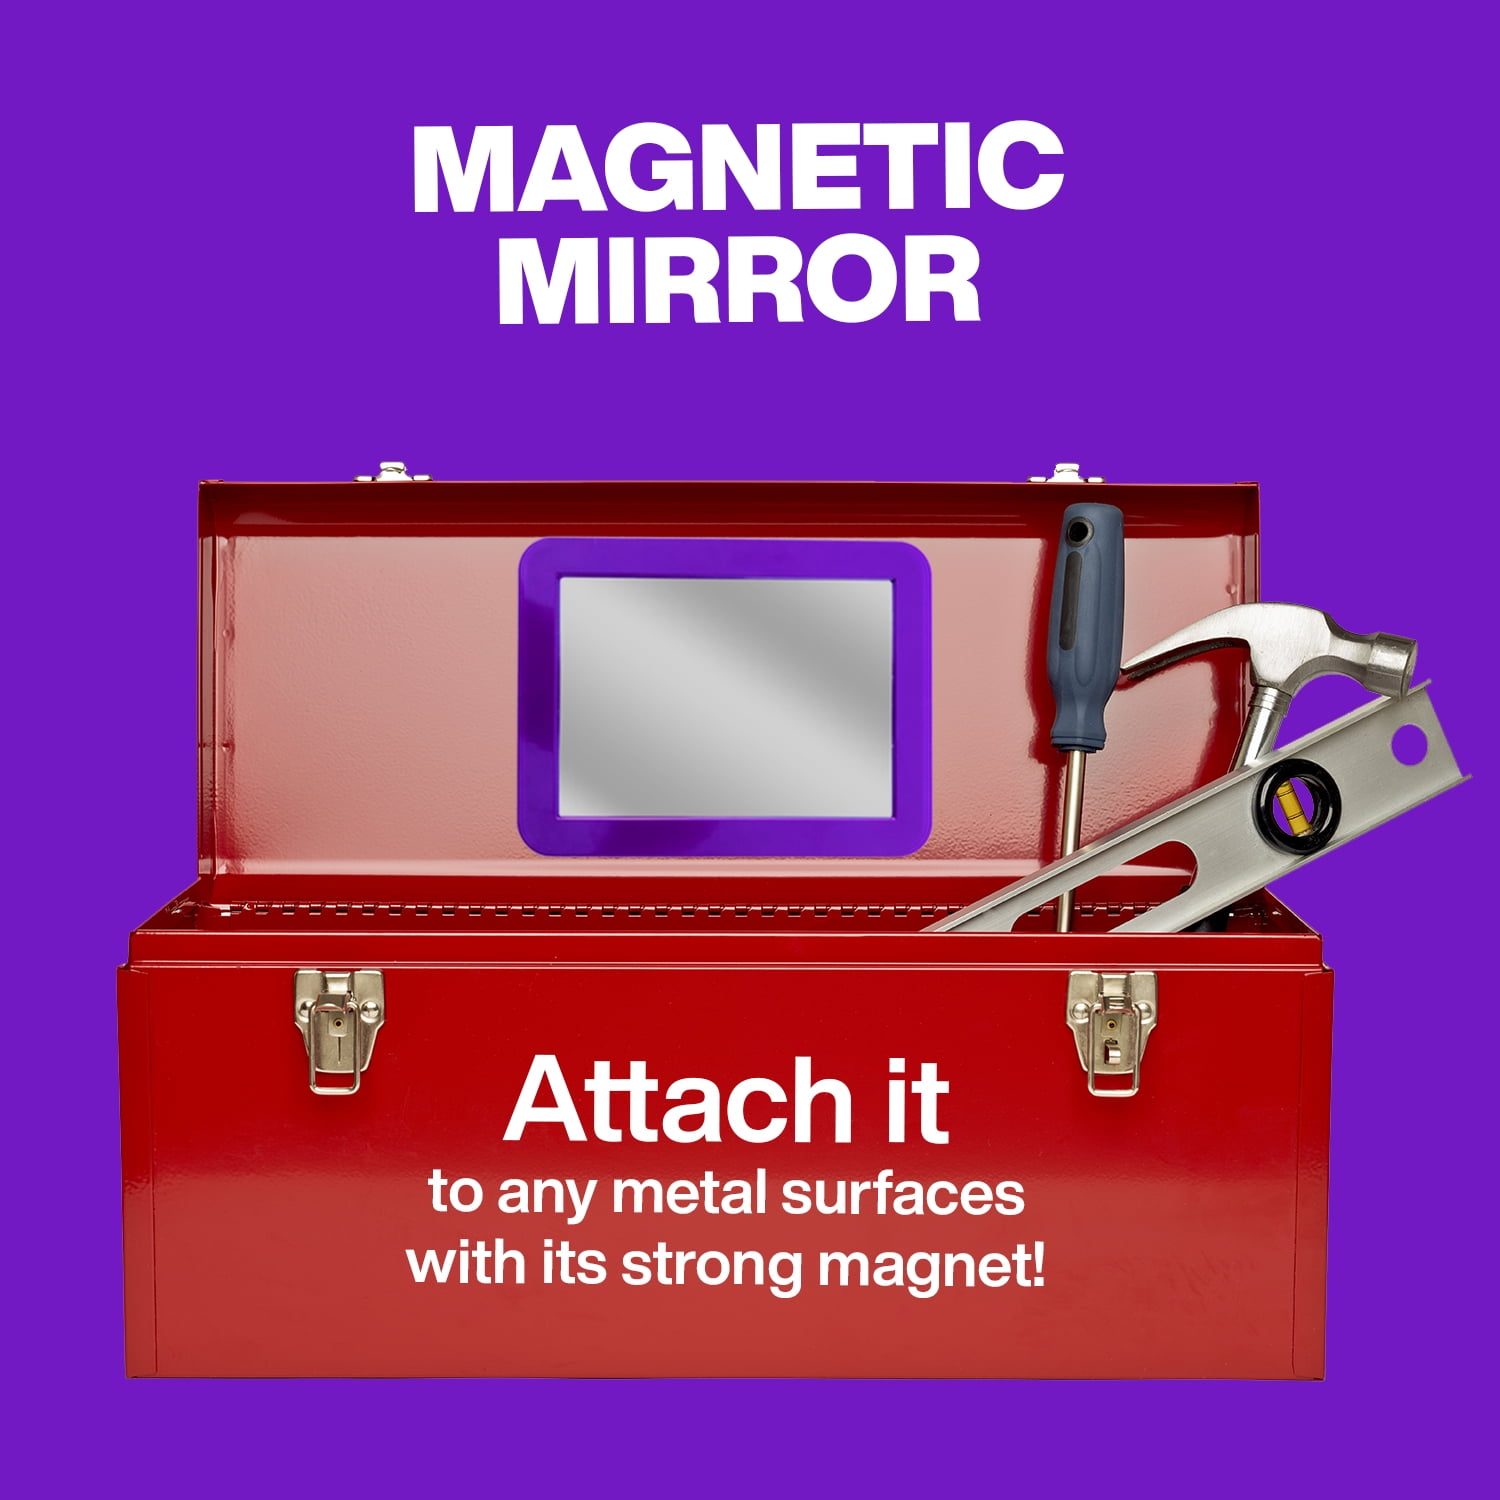 ideal for School Locker/Refregirator/Home/Workshop/Office Cabinet,Anti-Fog with Magnetic Back Infinite 5 x 7 inch Rounded Corner Personal Magnetic Mirror Pink 